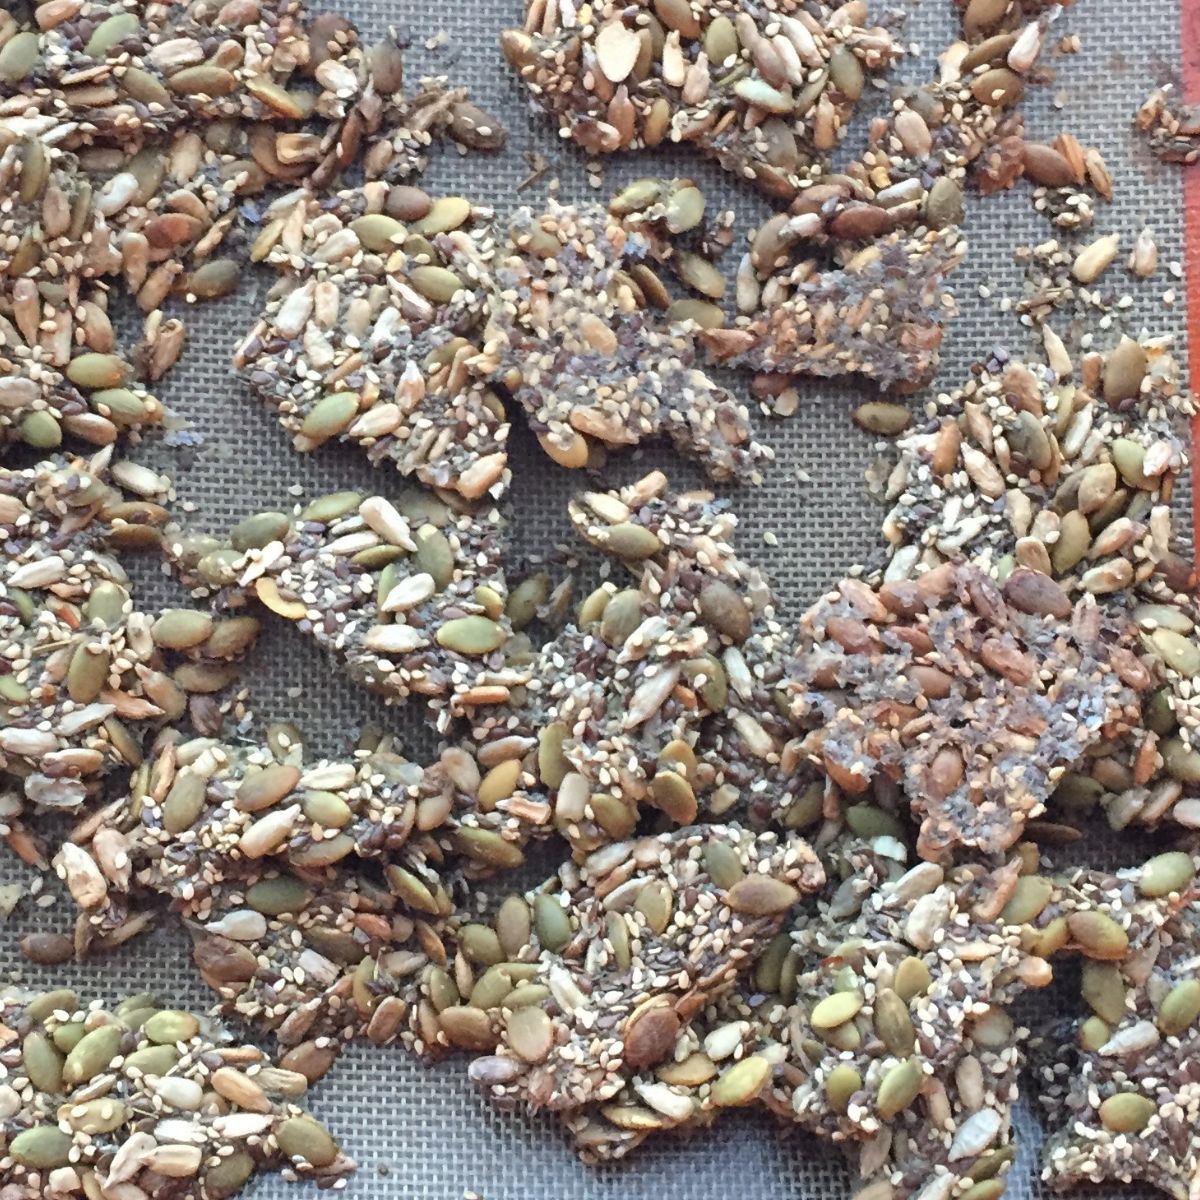 five seed crackers, made form pumpkin, sunflower sesame and other seeds.